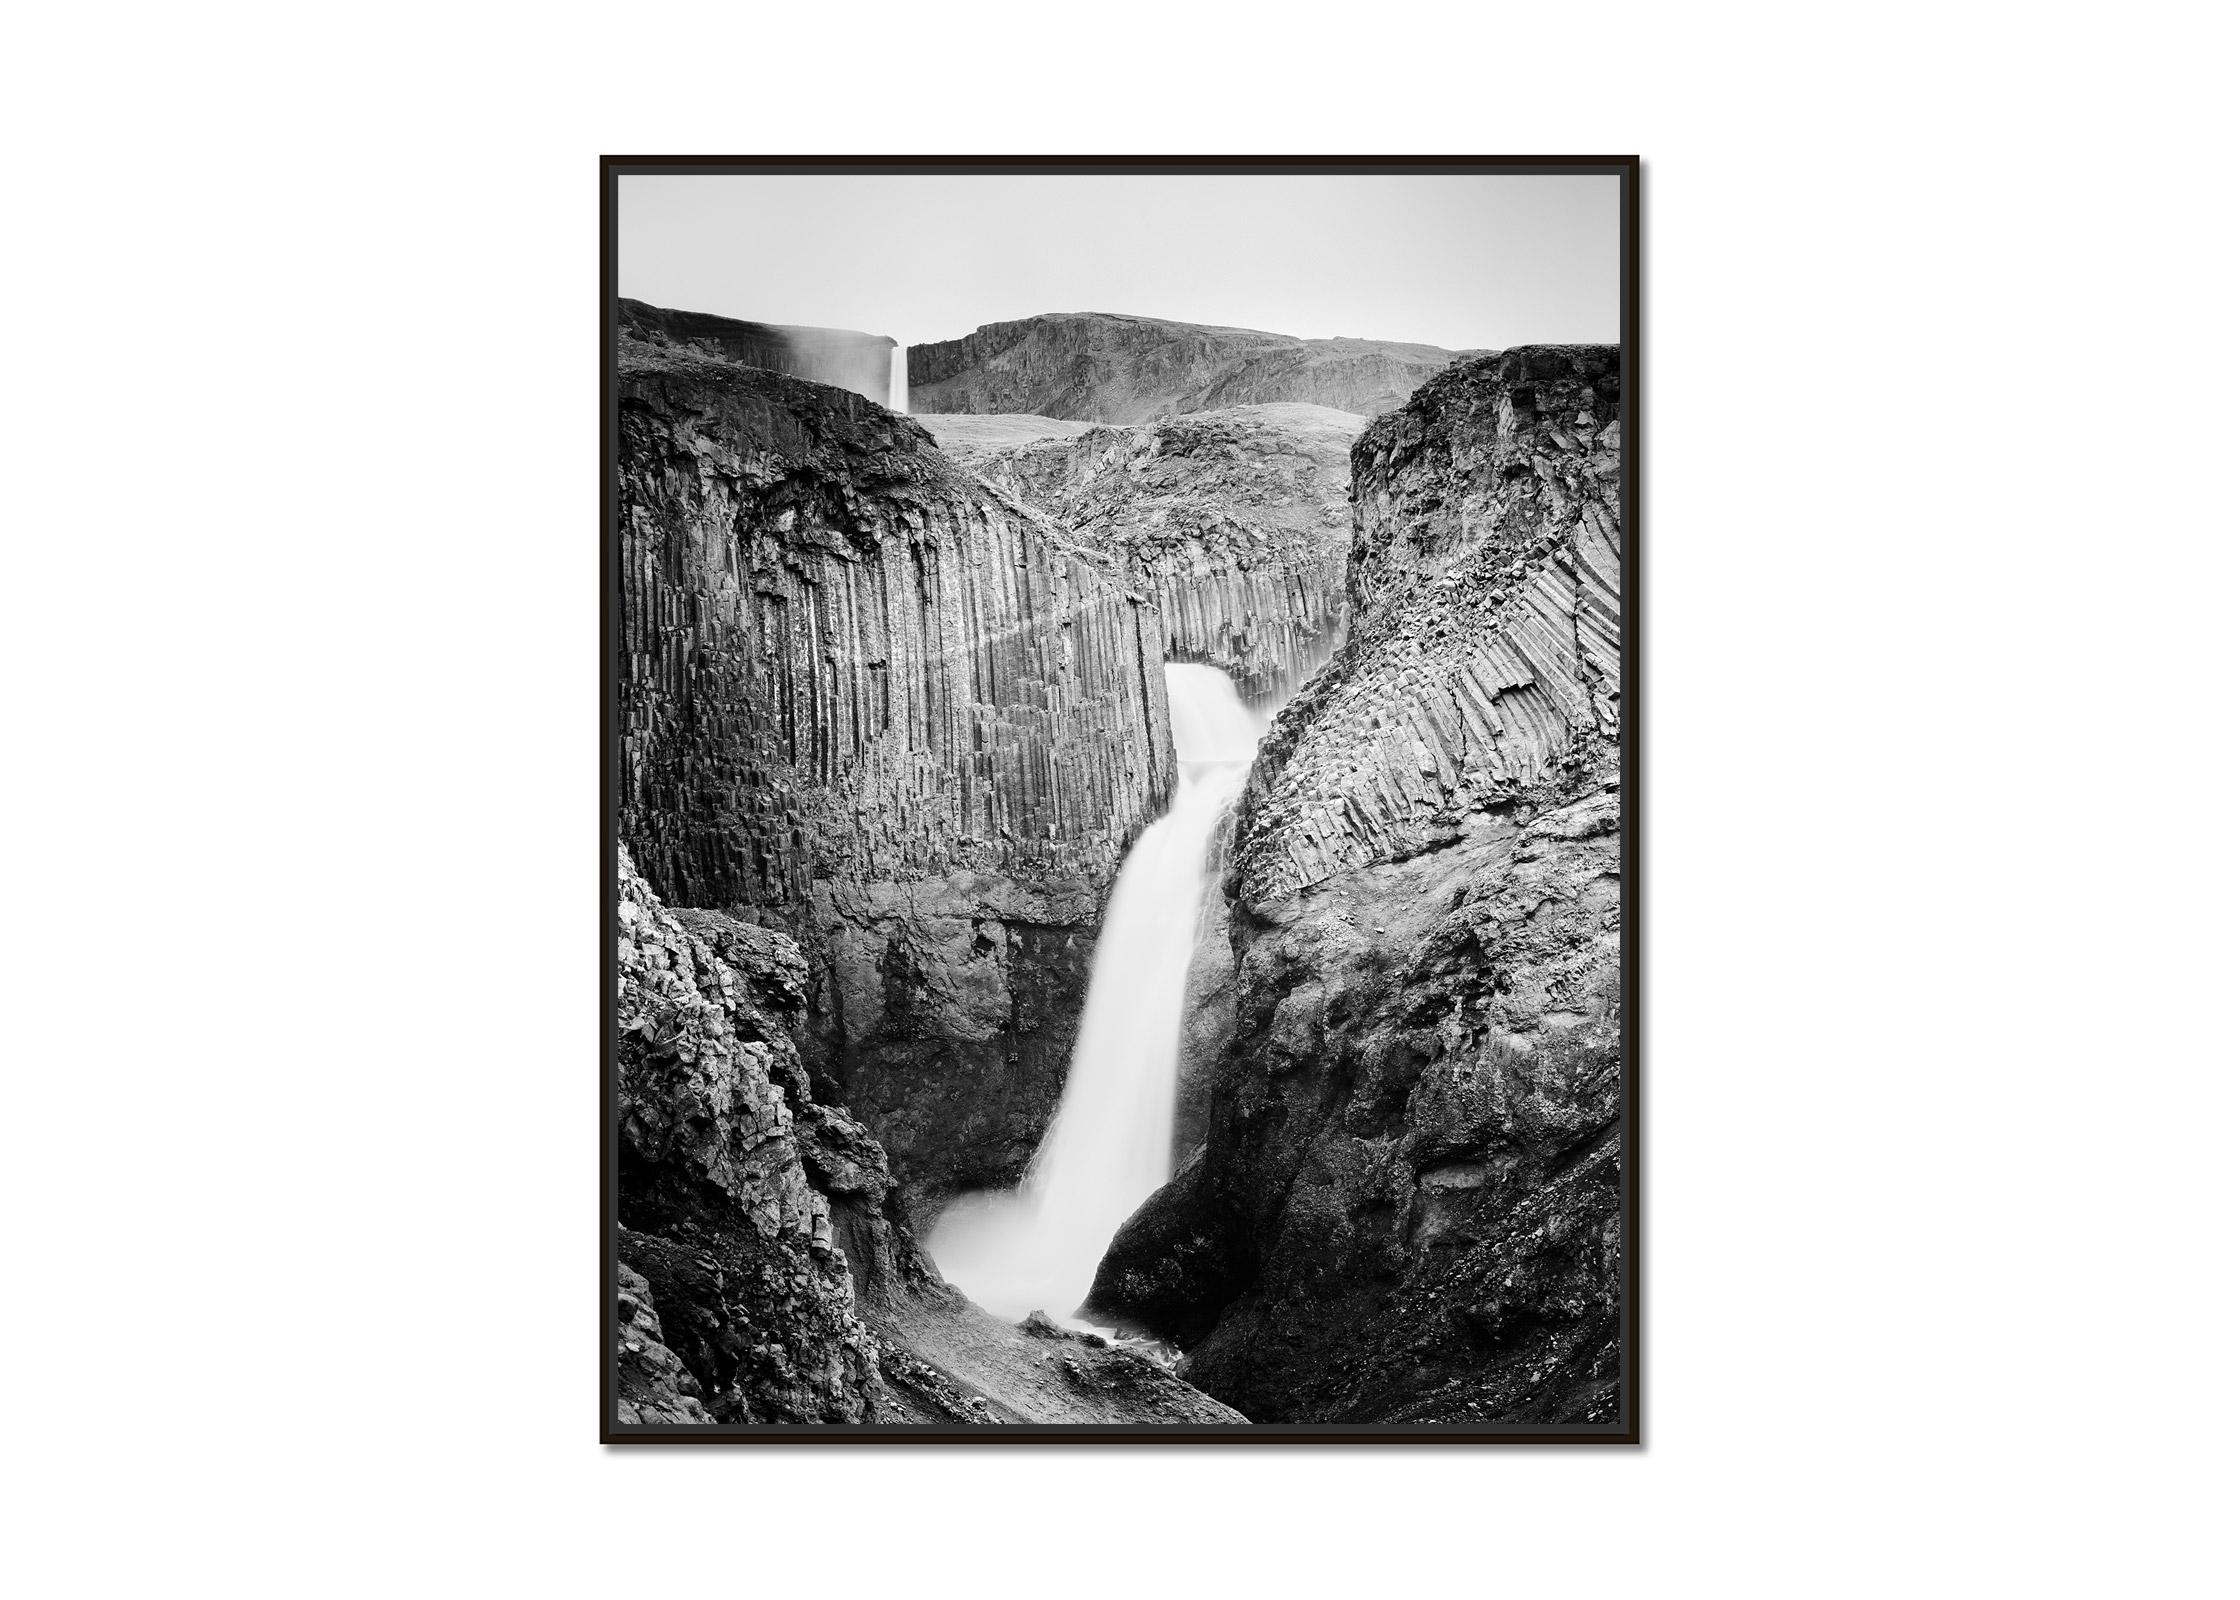 Hengifoss, Waterfall, Iceland, black and white fine art landscape photography - Photograph by Gerald Berghammer